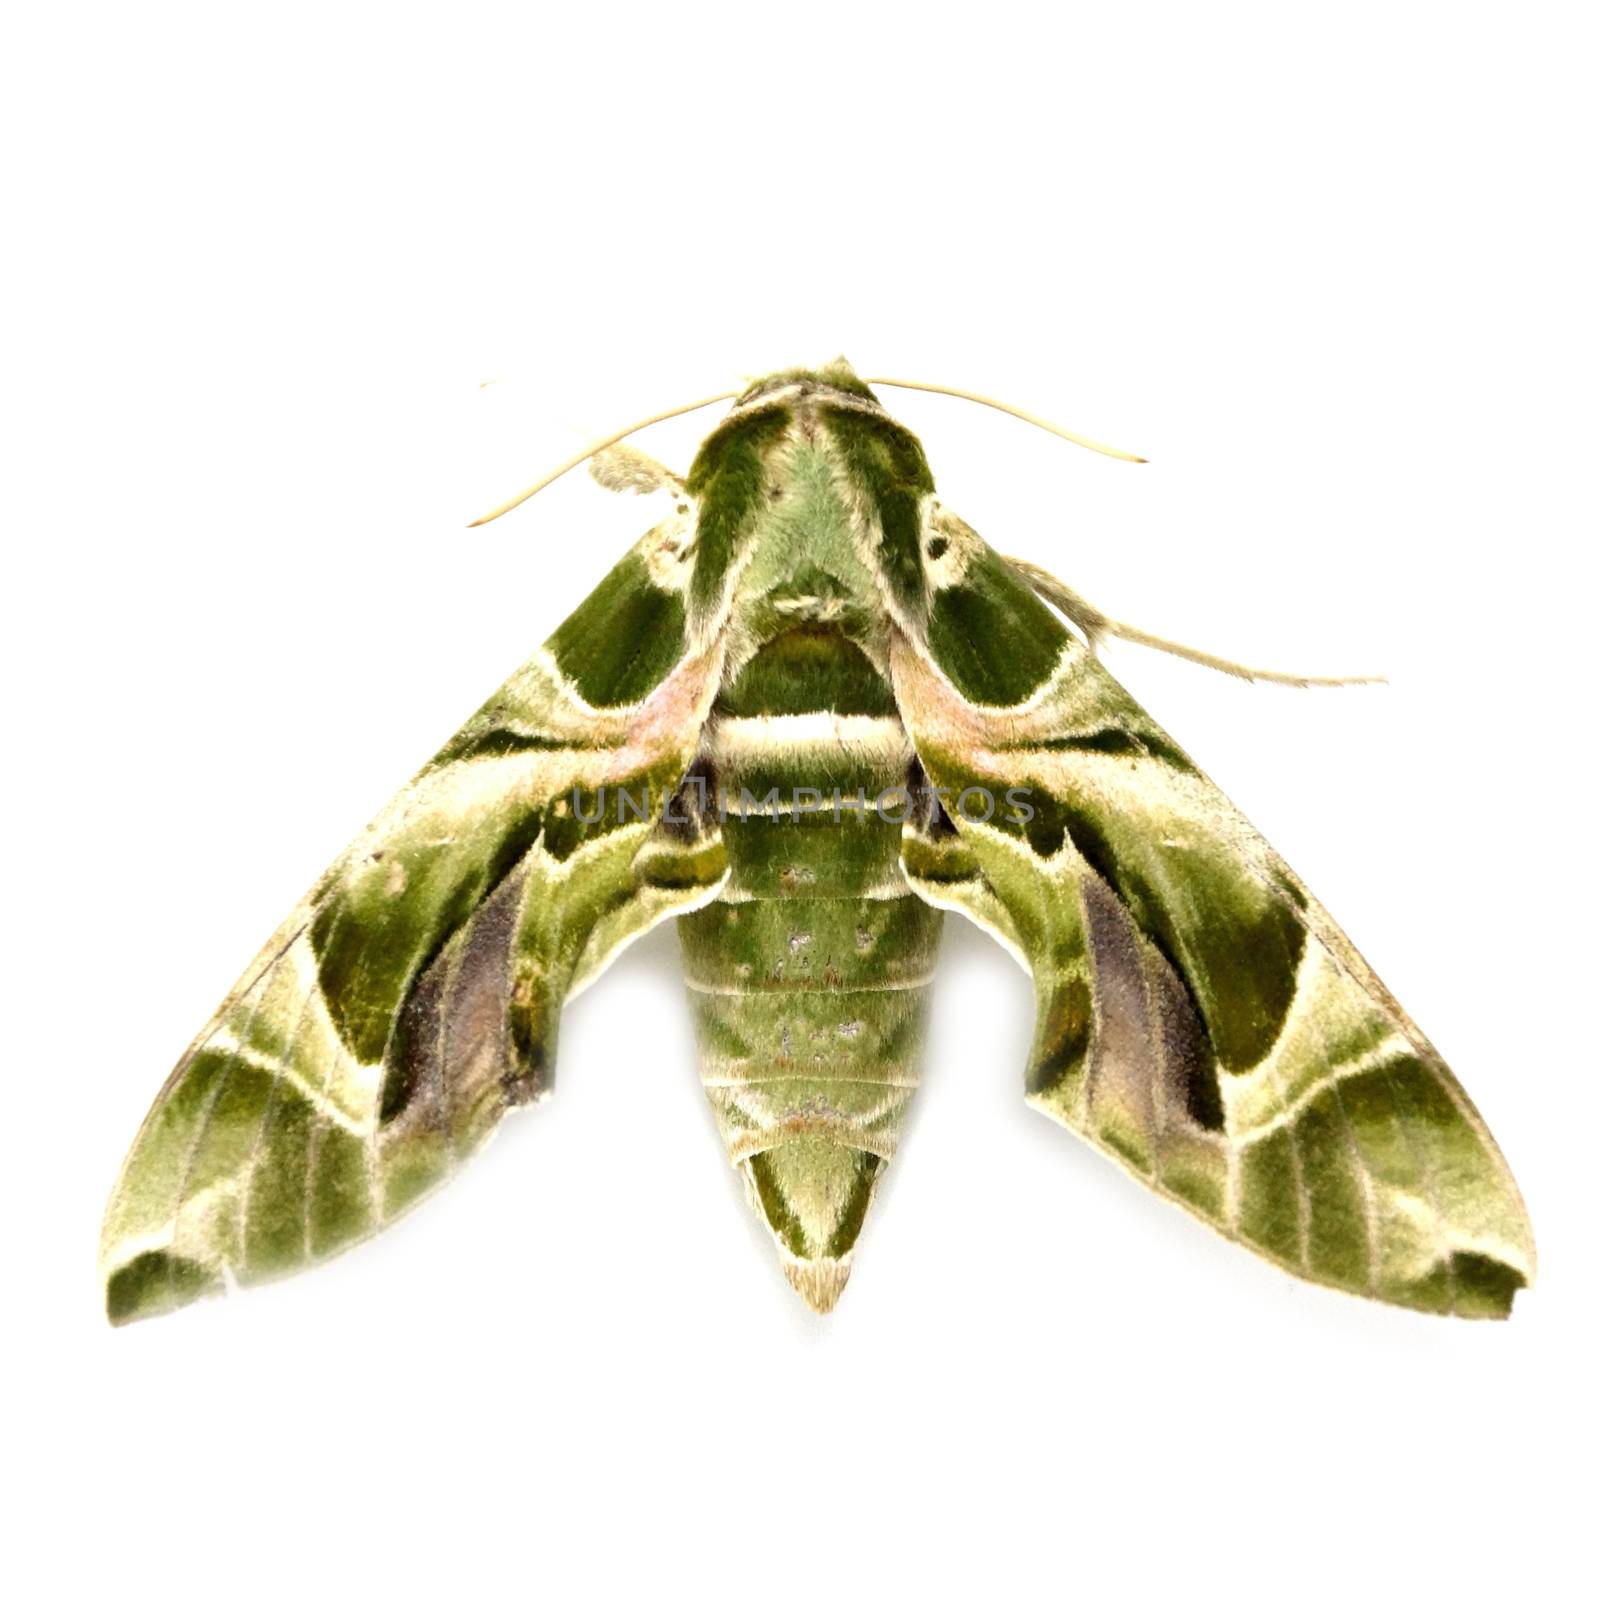 Oleander Hawk moth (Daphnis nerii) isolated on white by Noppharat_th